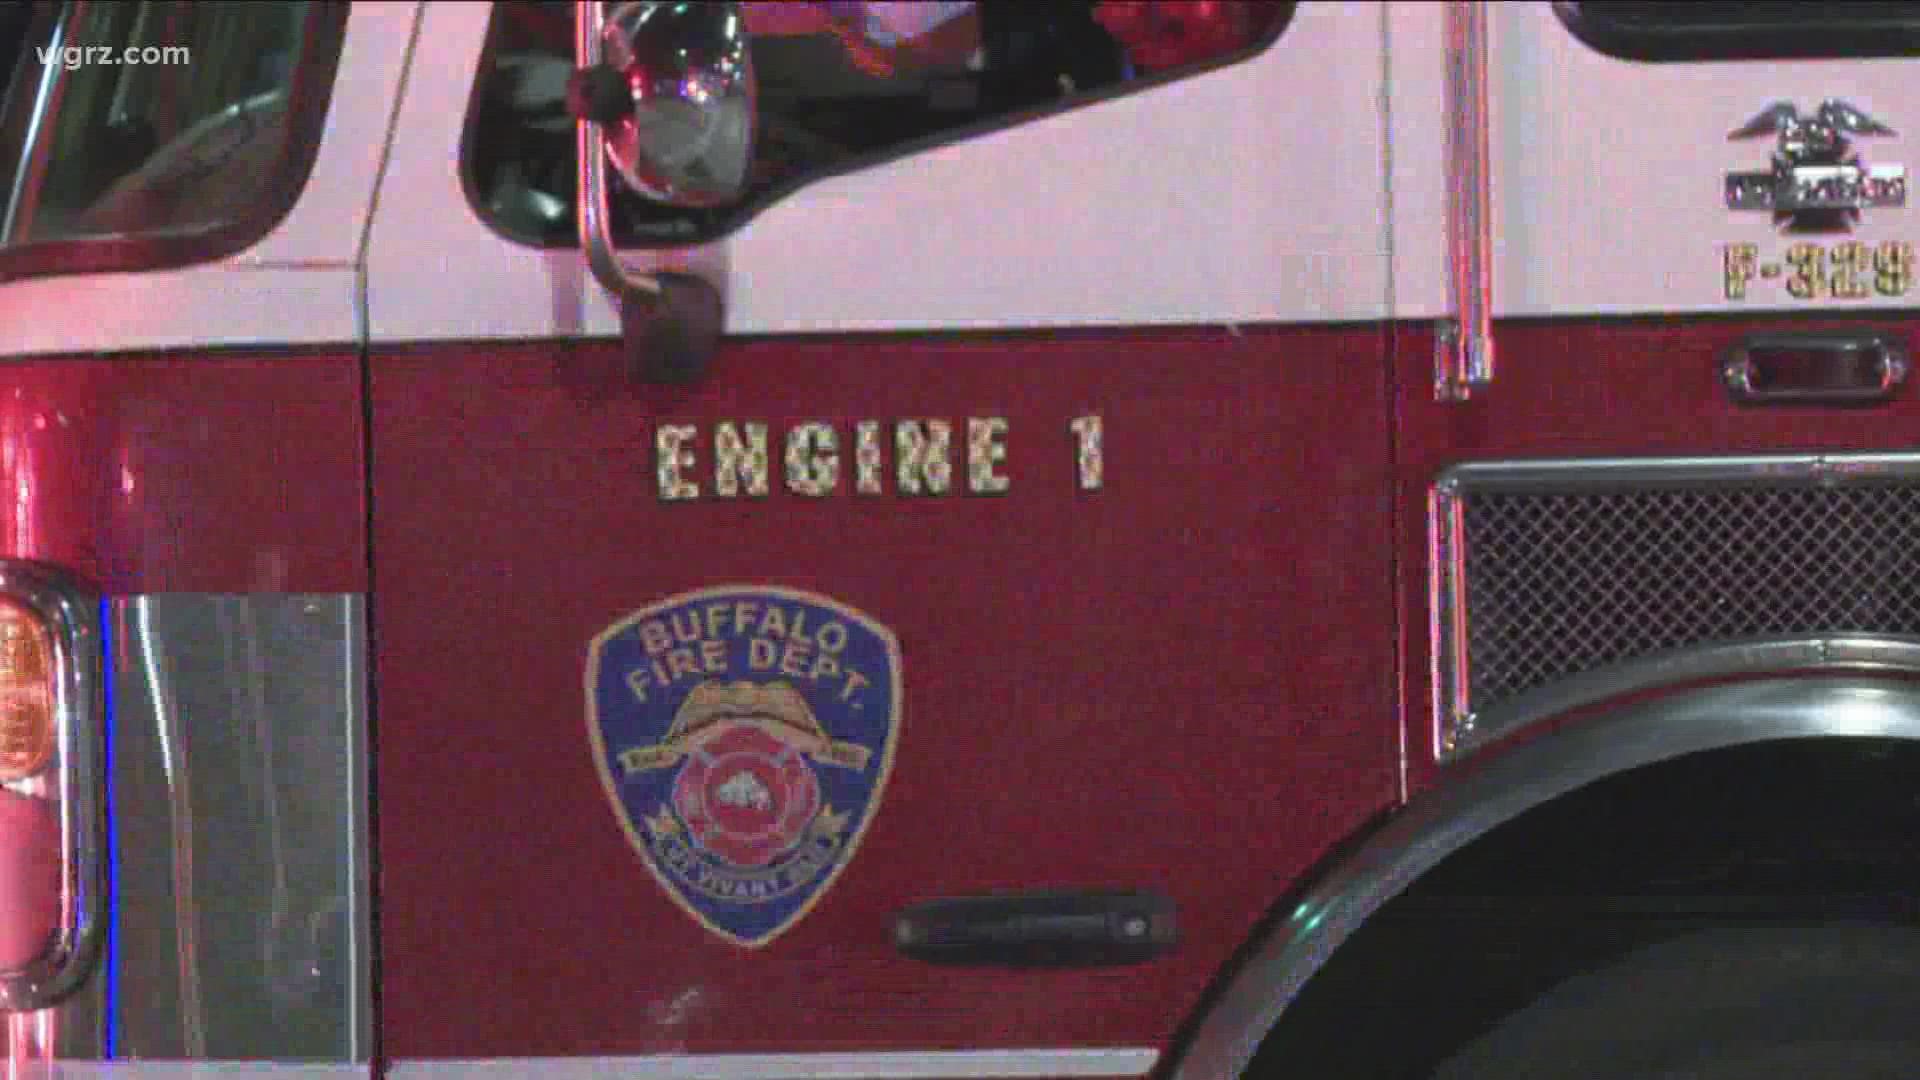 A fire truck in particular from the Buffalo Fire Department was actually stolen while firefighters were busy on a call.